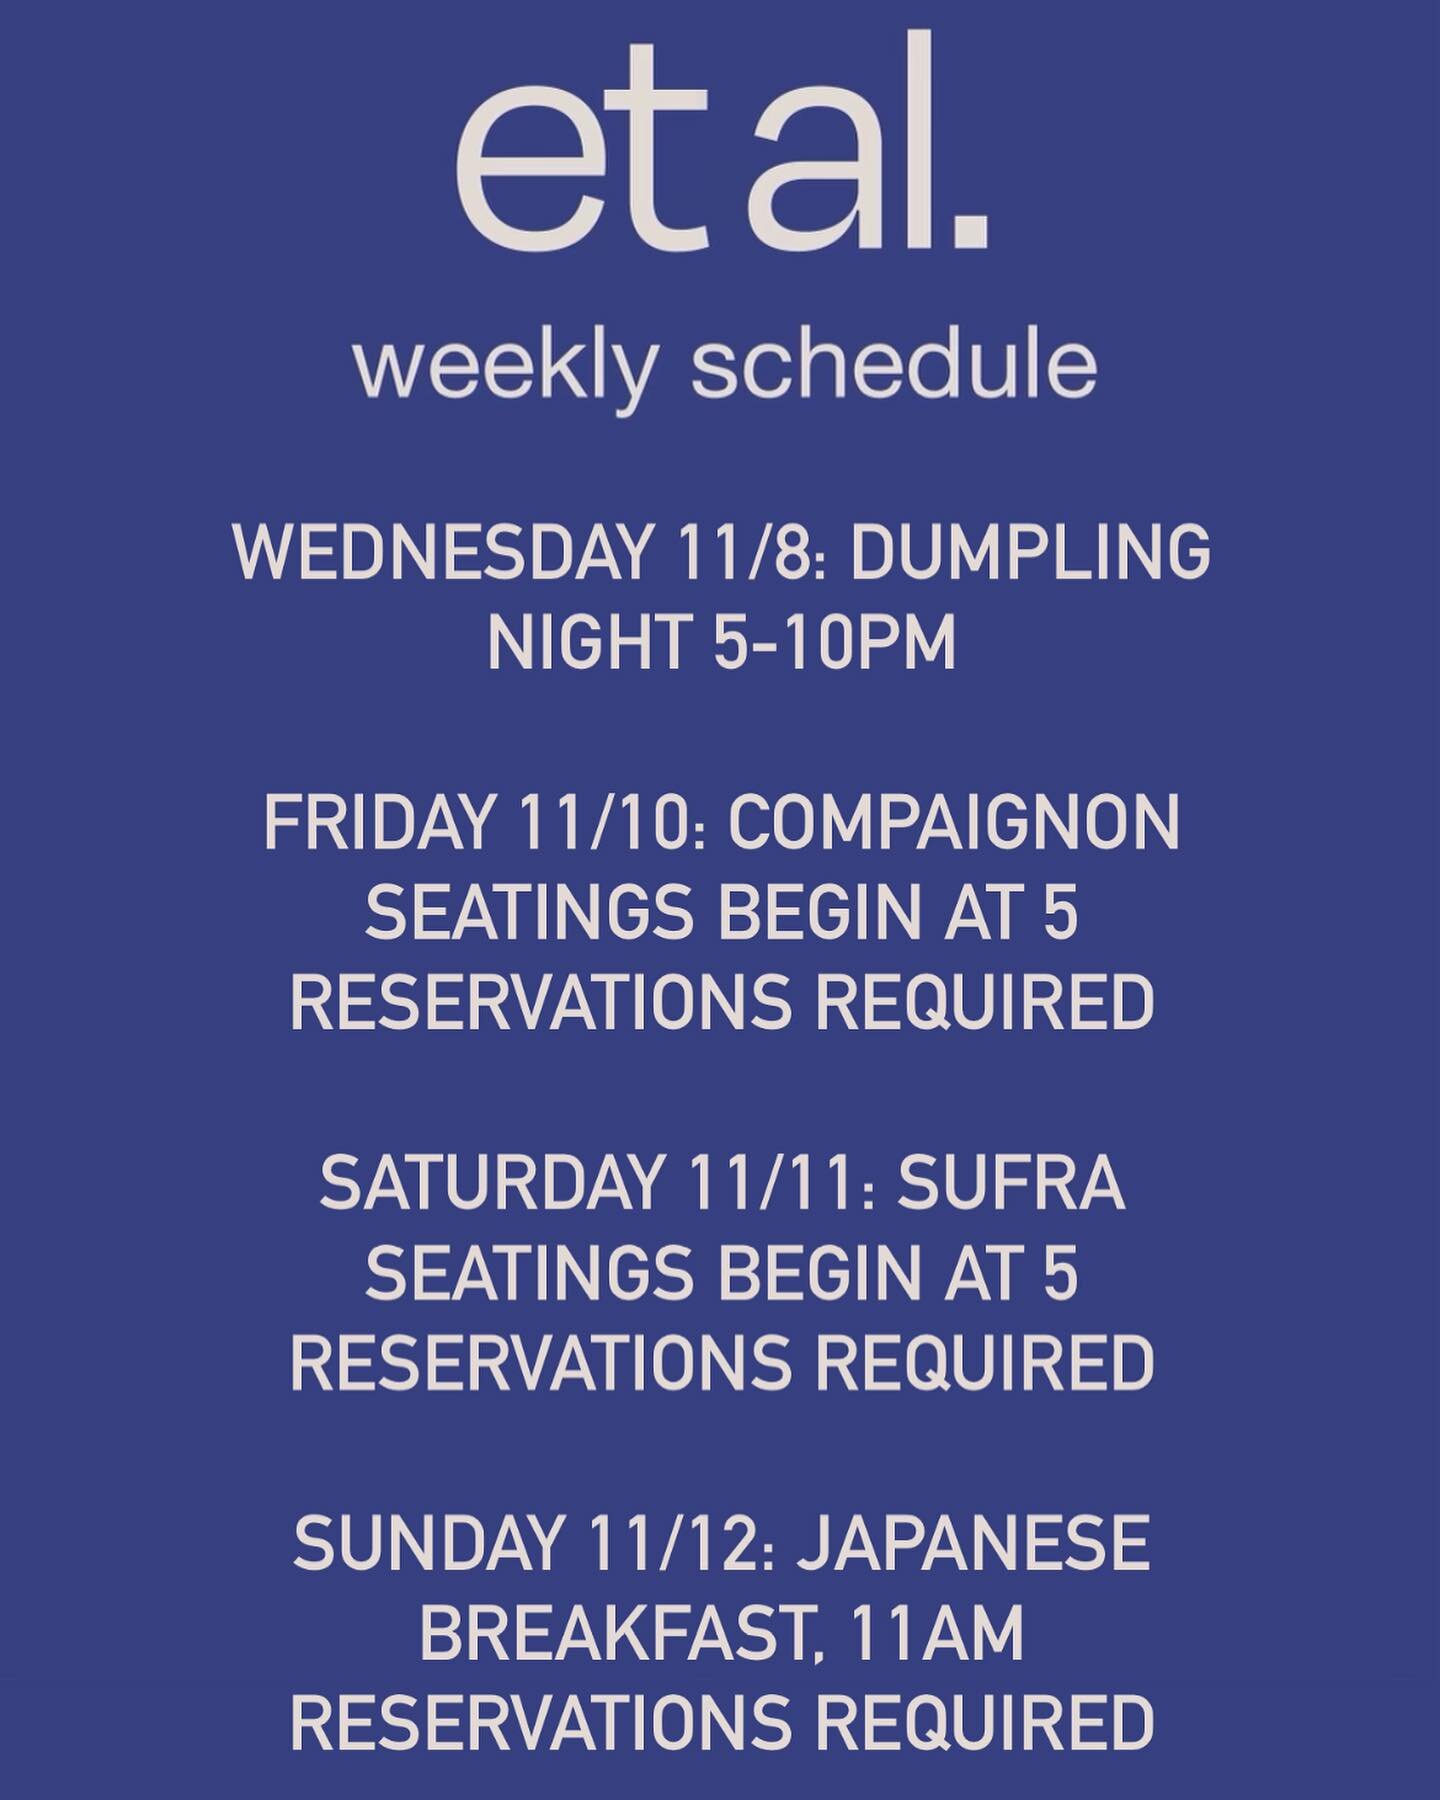 This week with Et Al! 🎉

There&rsquo;s no other way to put it, we&rsquo;ve got a gigantic week ahead of us in the absolute best way.

The newest iteration of Compaignon, Alsace, begins this Friday! Followed by our newest program, Sufra, which will m